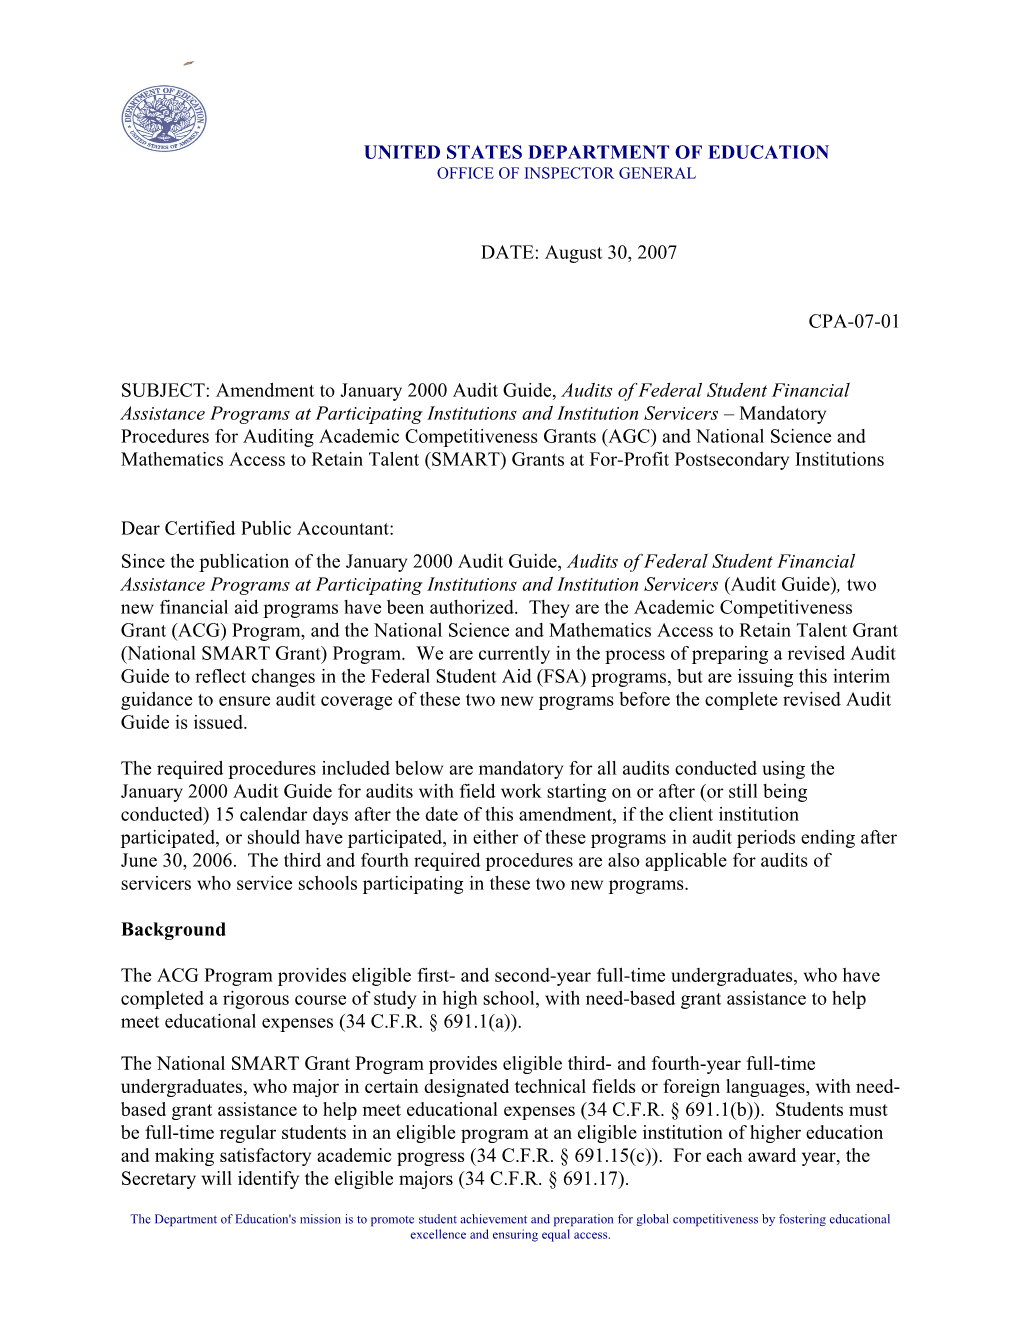 Amendment to January 2000 Audit Guide, Audits of Federal Student Financial Assistance Programs